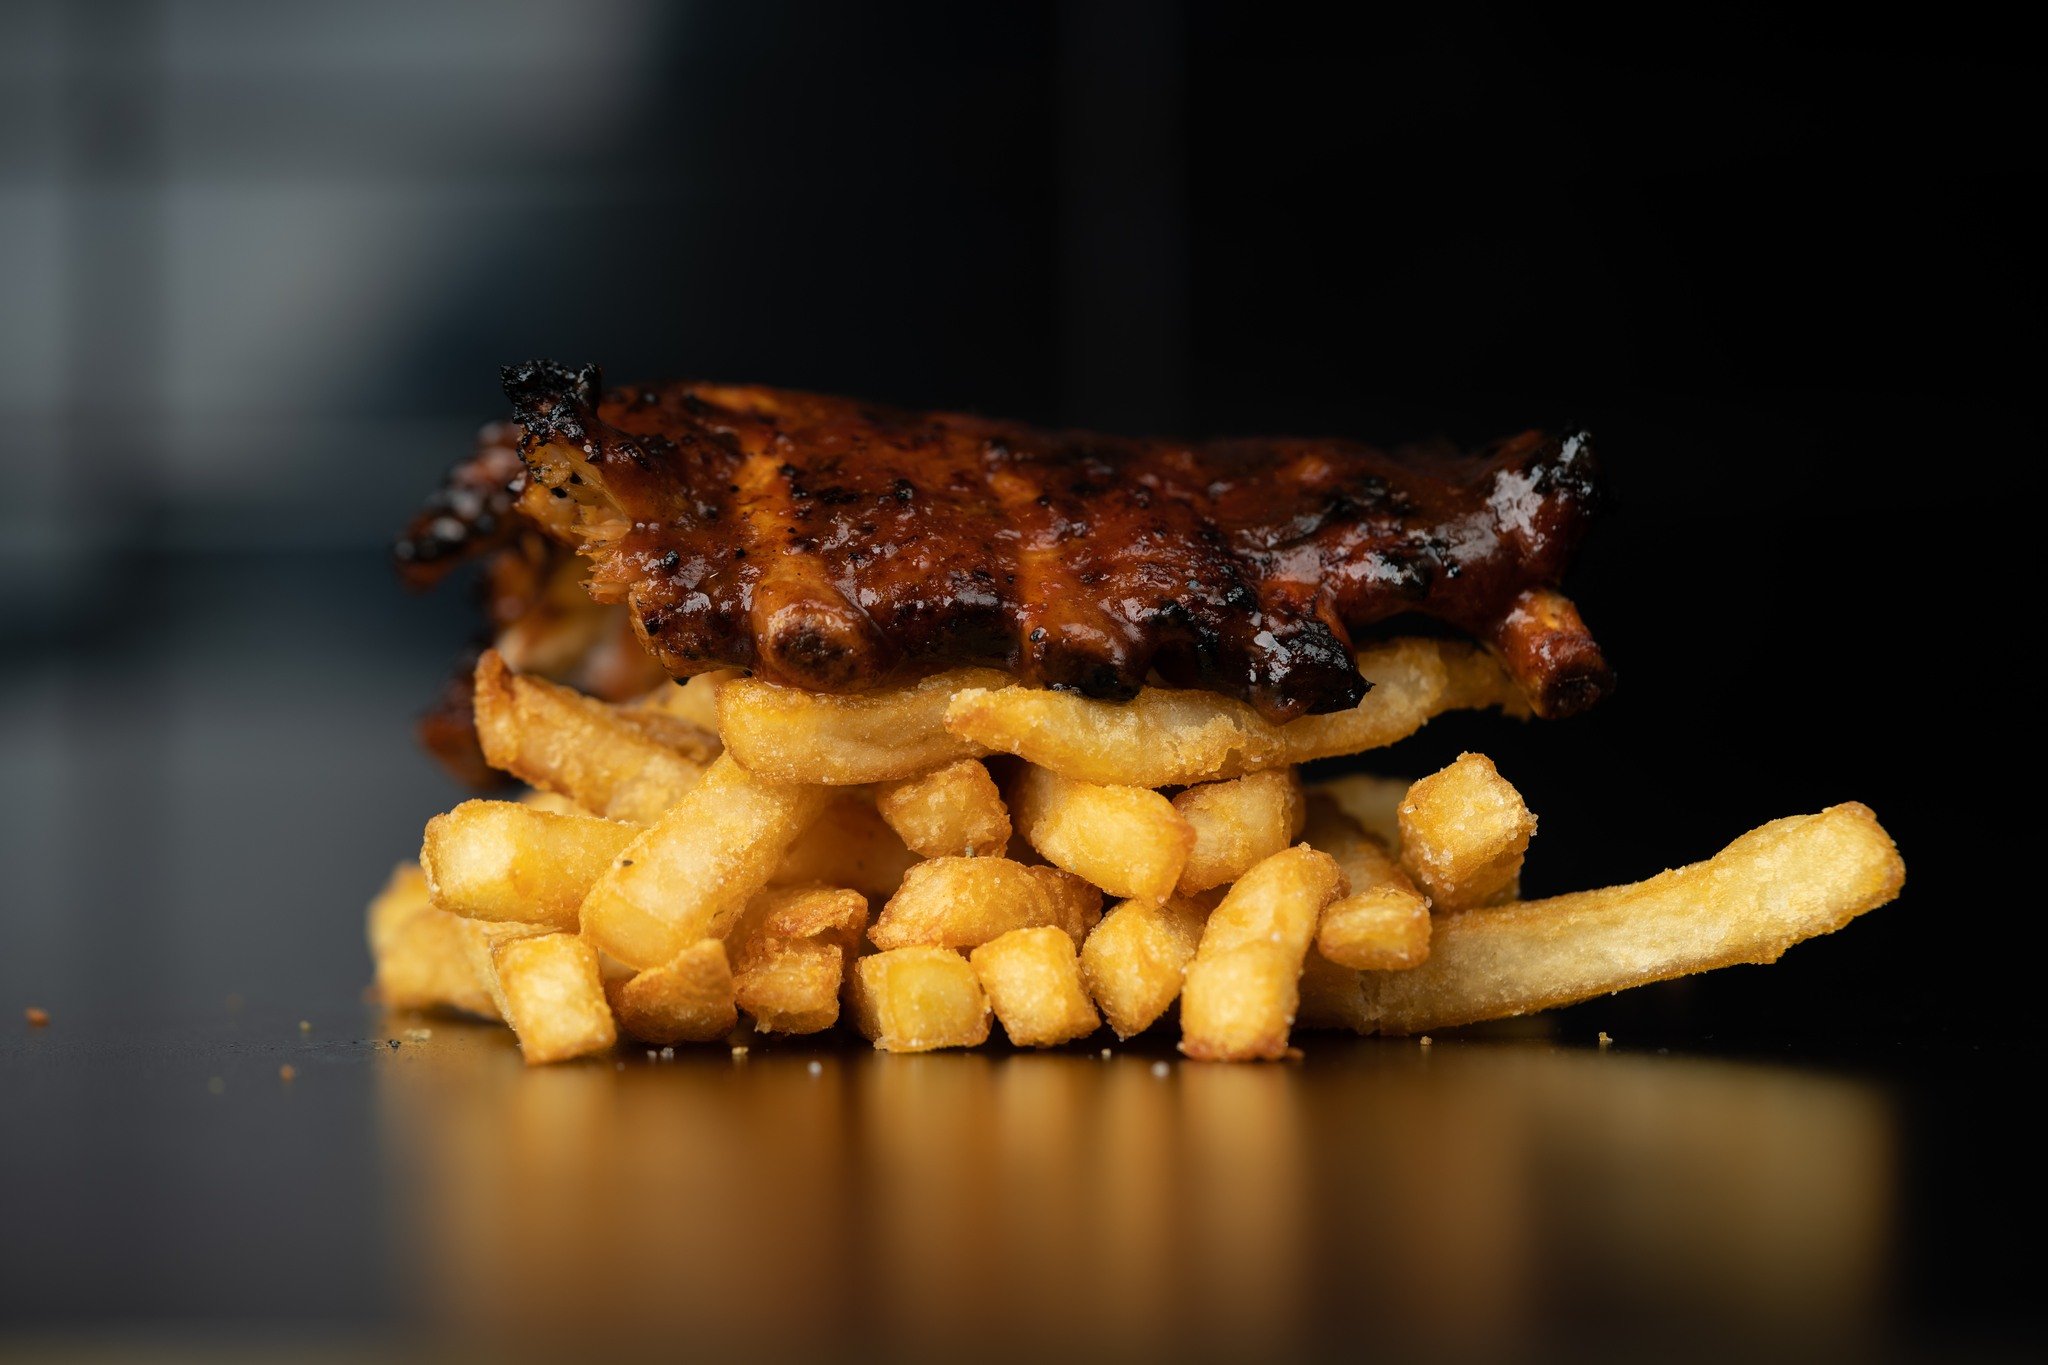 You're gearing up for footy, the beers are cold and the boys are on their way over. But suddenly realise you've forgotten to organise lunch..
Boss has you covered. Jump on the app and ordered racks of ribs for the crew. Crisis averted.

&mdash;&gt; O